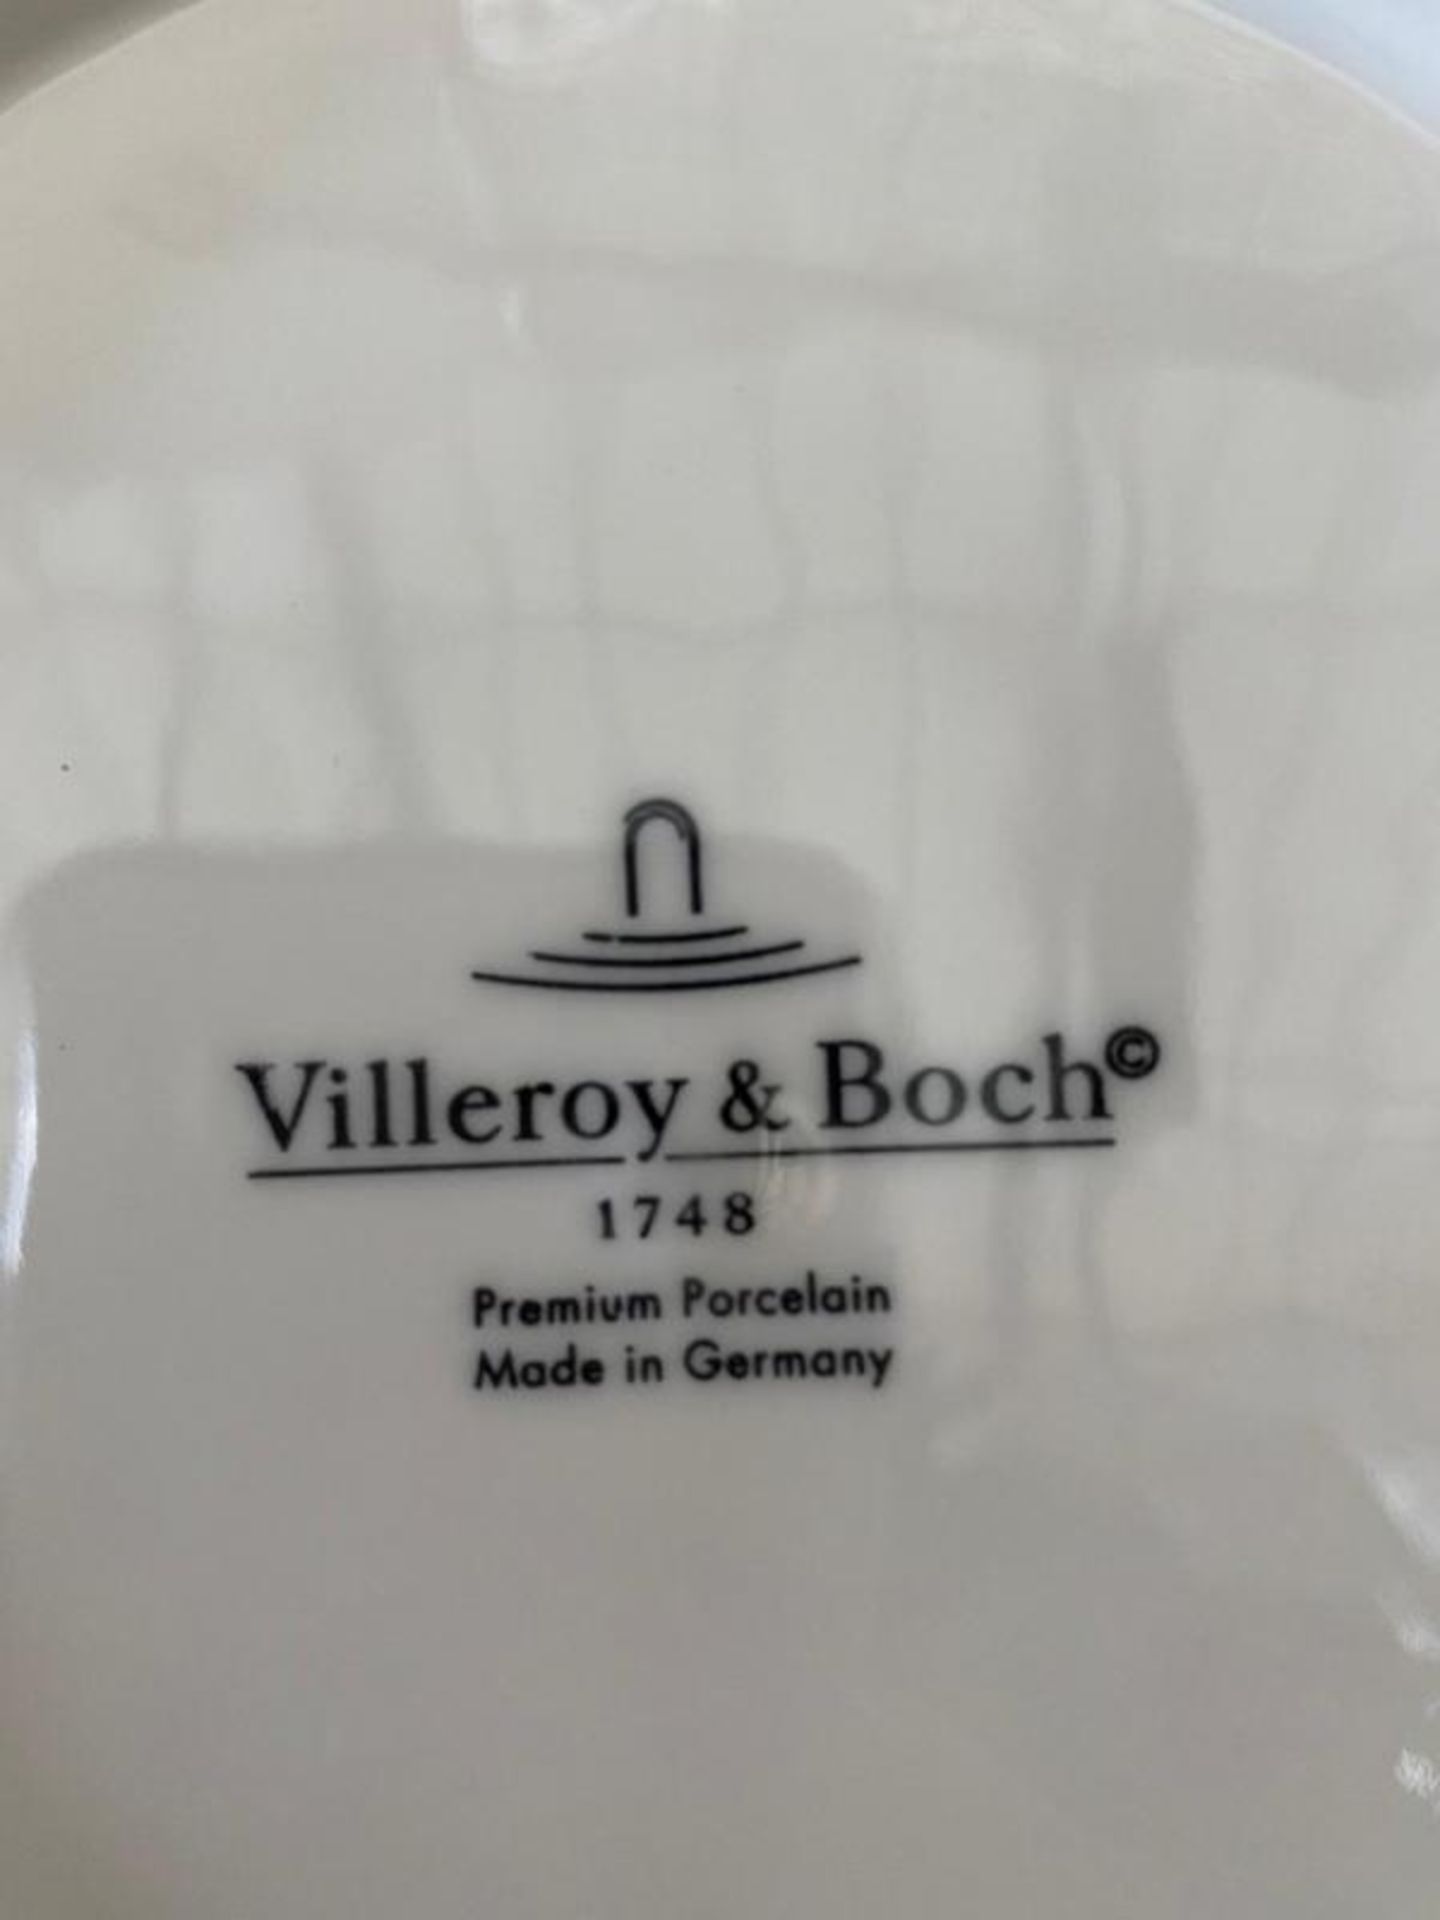 6 x Villeroy & Boch Royal Dinner Plate -290mm (29cm) - Ref: 1044122620 - New and boxed - CL011 - MC5 - Image 2 of 5